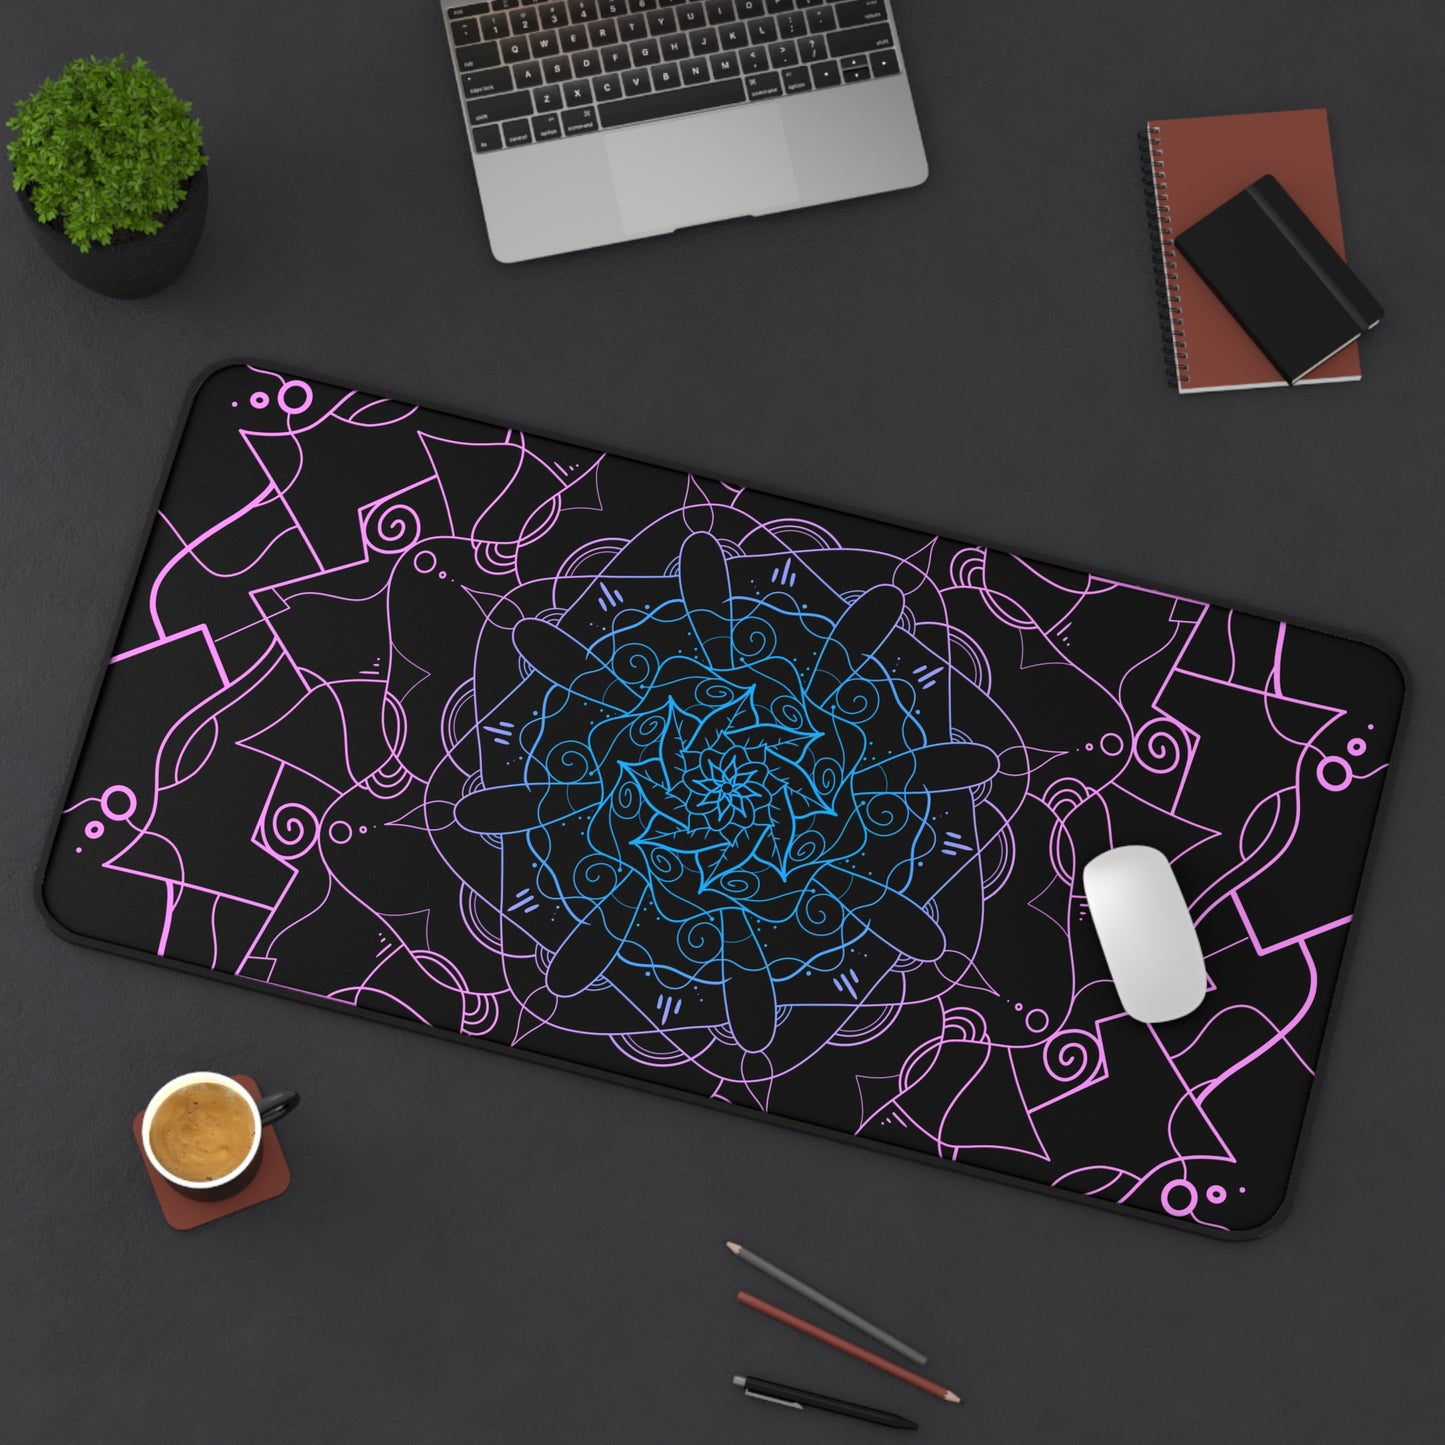 A 31" x 15.5" desk mat with a pink and blue mandala pattern on a black background sitting at an angle.